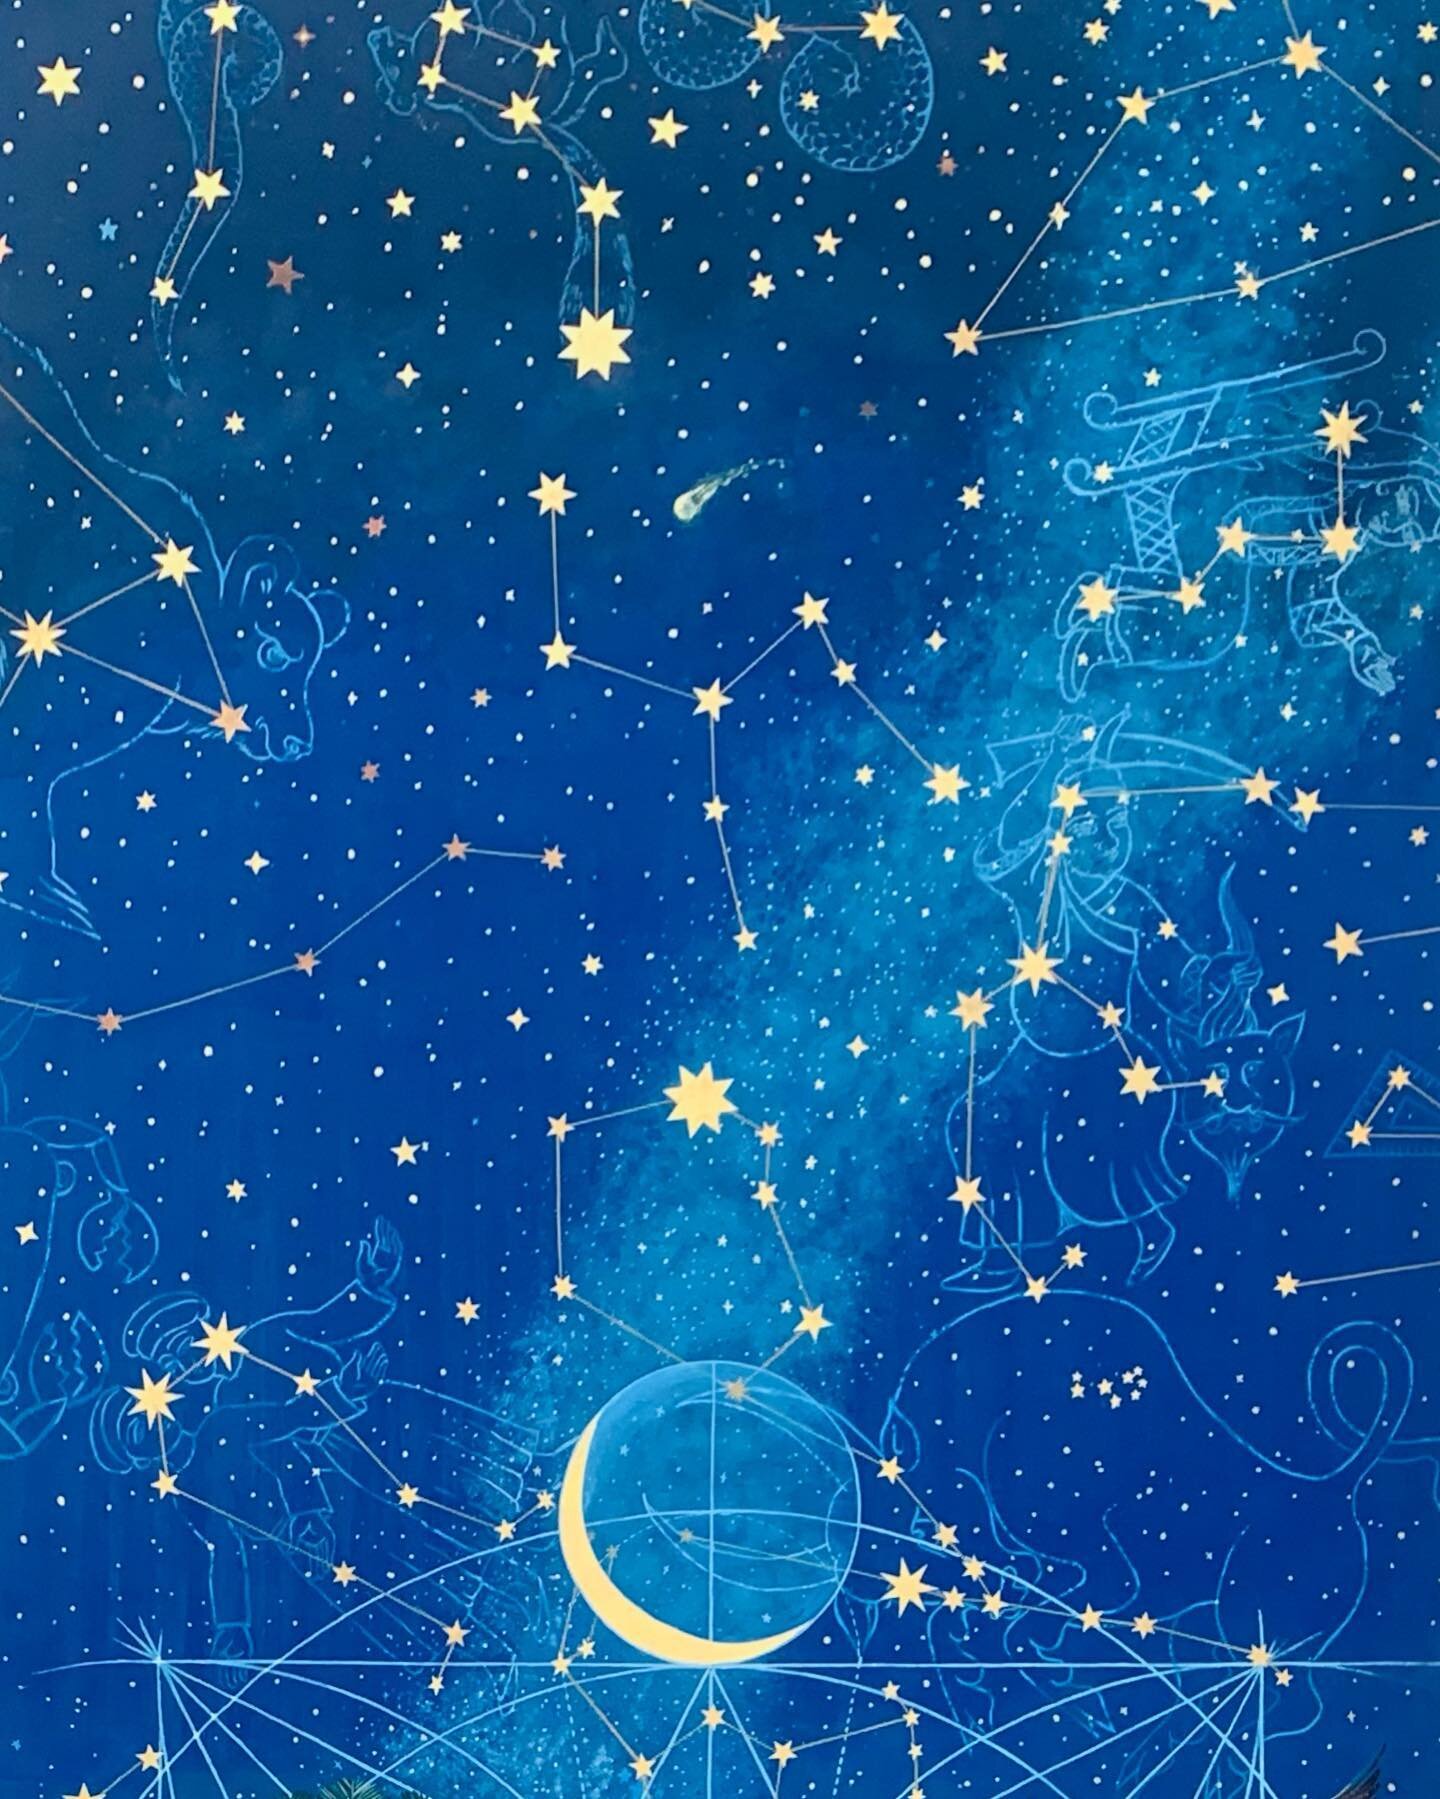 A little bit of sky featuring our moon, our galaxy, some major constellations and a little green comet ✨
Roughly 18ft x 20ft